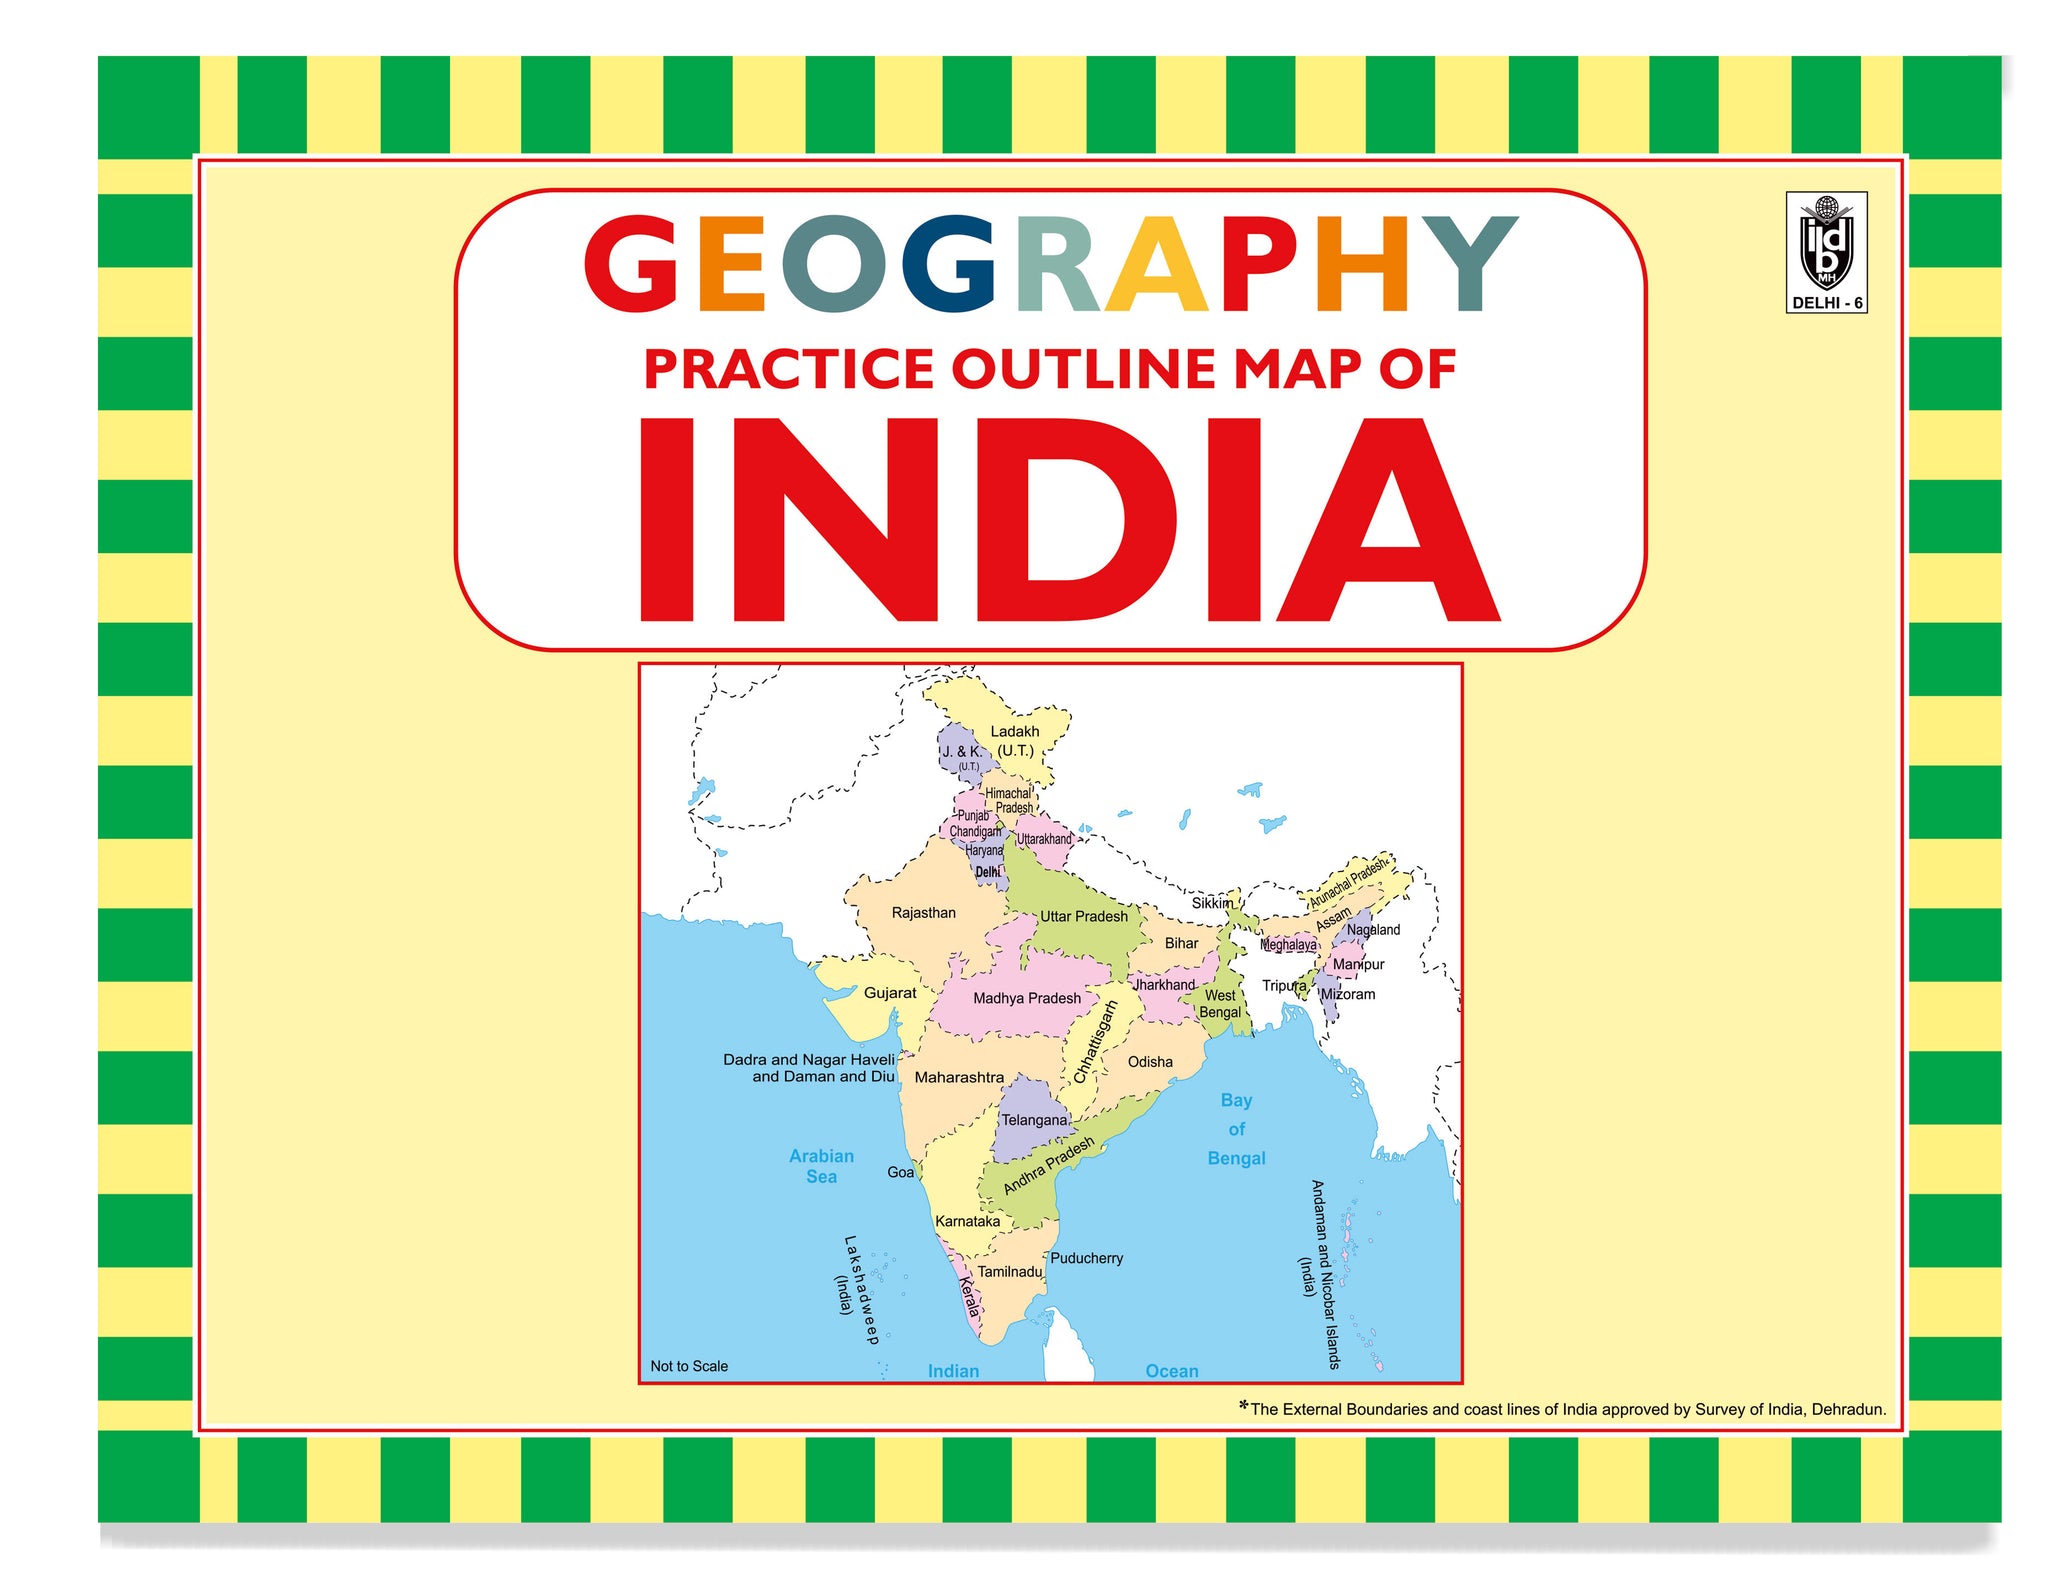 Geography Practice outline Map book of INDIA